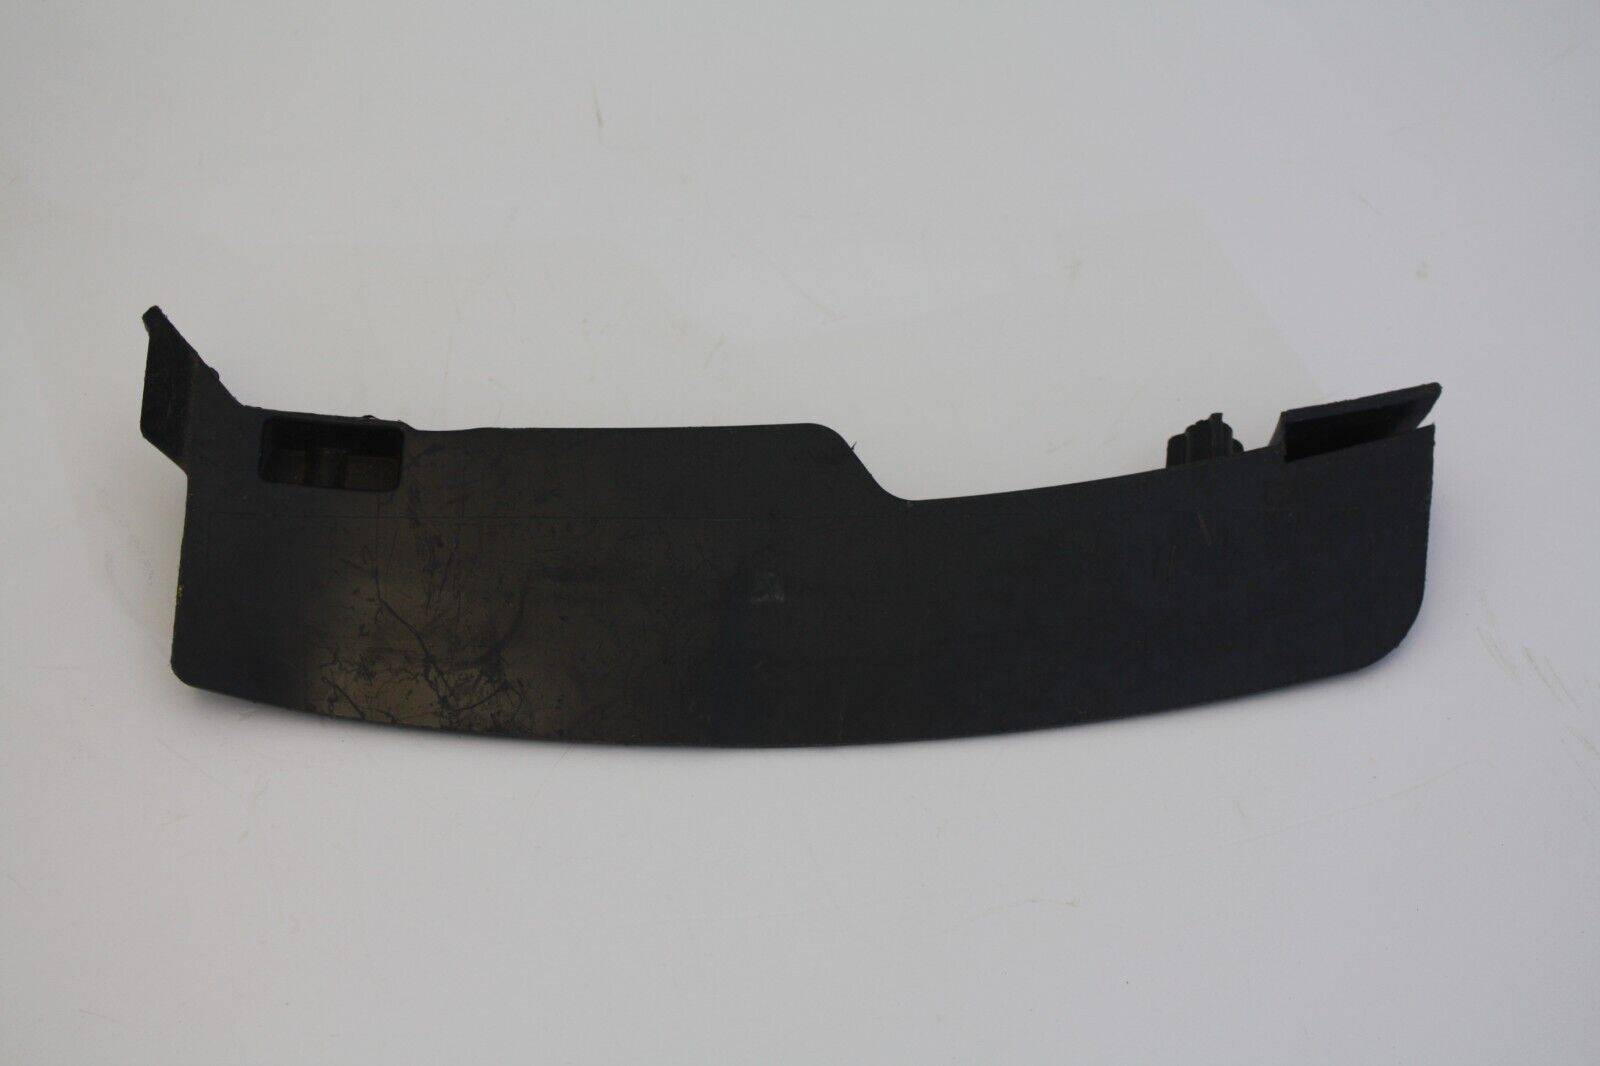 Audi A3 S Line Front Bumper Right Bracket 2020 ON 8Y0807410A Genuine 176218603237